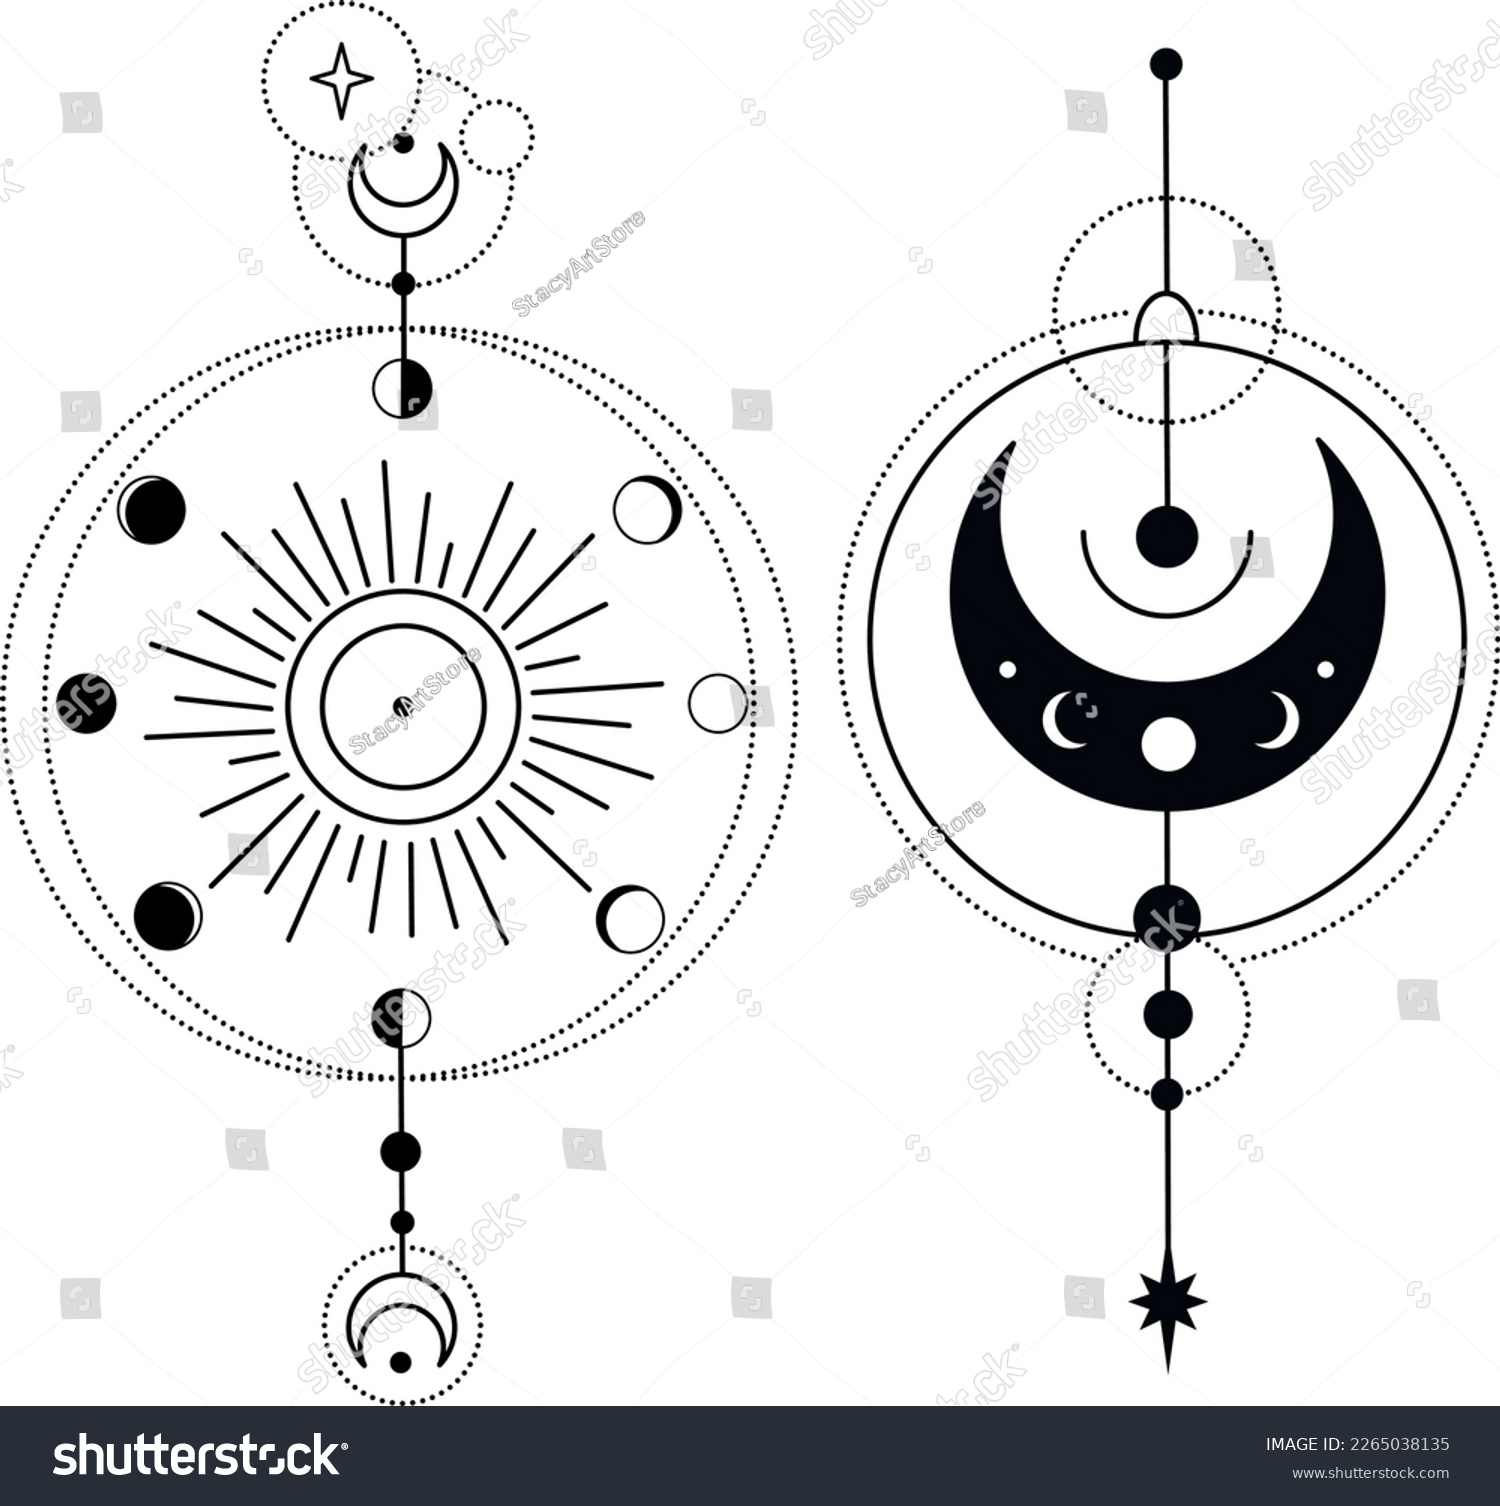 SVG of Gold Bohemian Universe Illustration with Moon Phases, Stars and Rays . Astrology SVG Vector Clipart. Celestial, Mystical, Esoteric designs perfect for Printing. T-shirt, Mugs Cut File. Universe Art svg